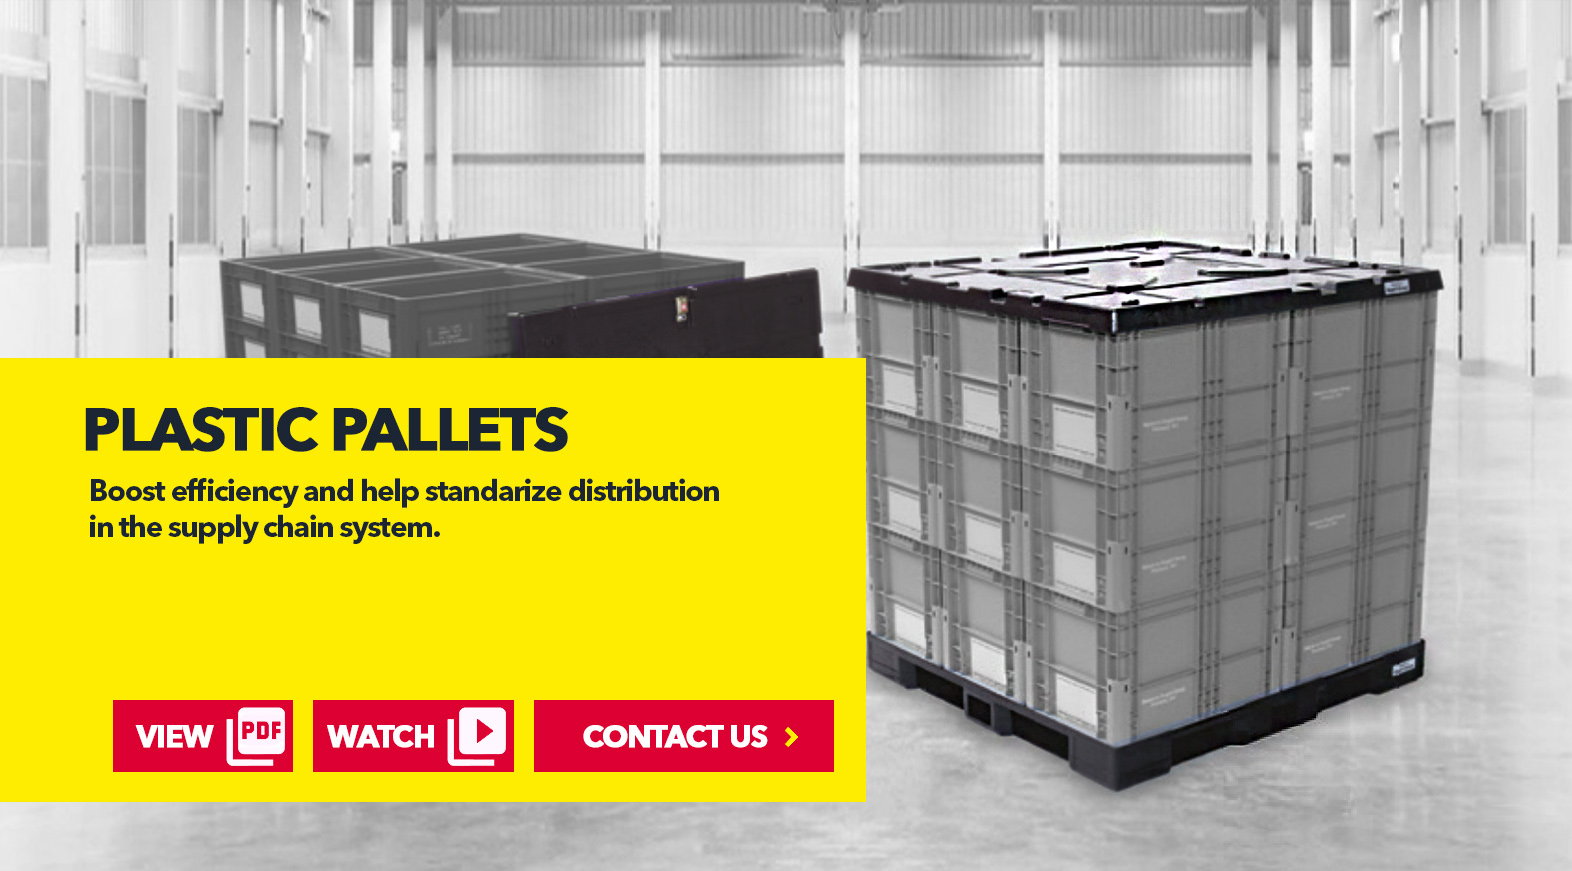 Reusable Plastic Pallets by SSI Schaefer USA Download Guide, Watch Video, Contact Us. www.chaefershelving.com